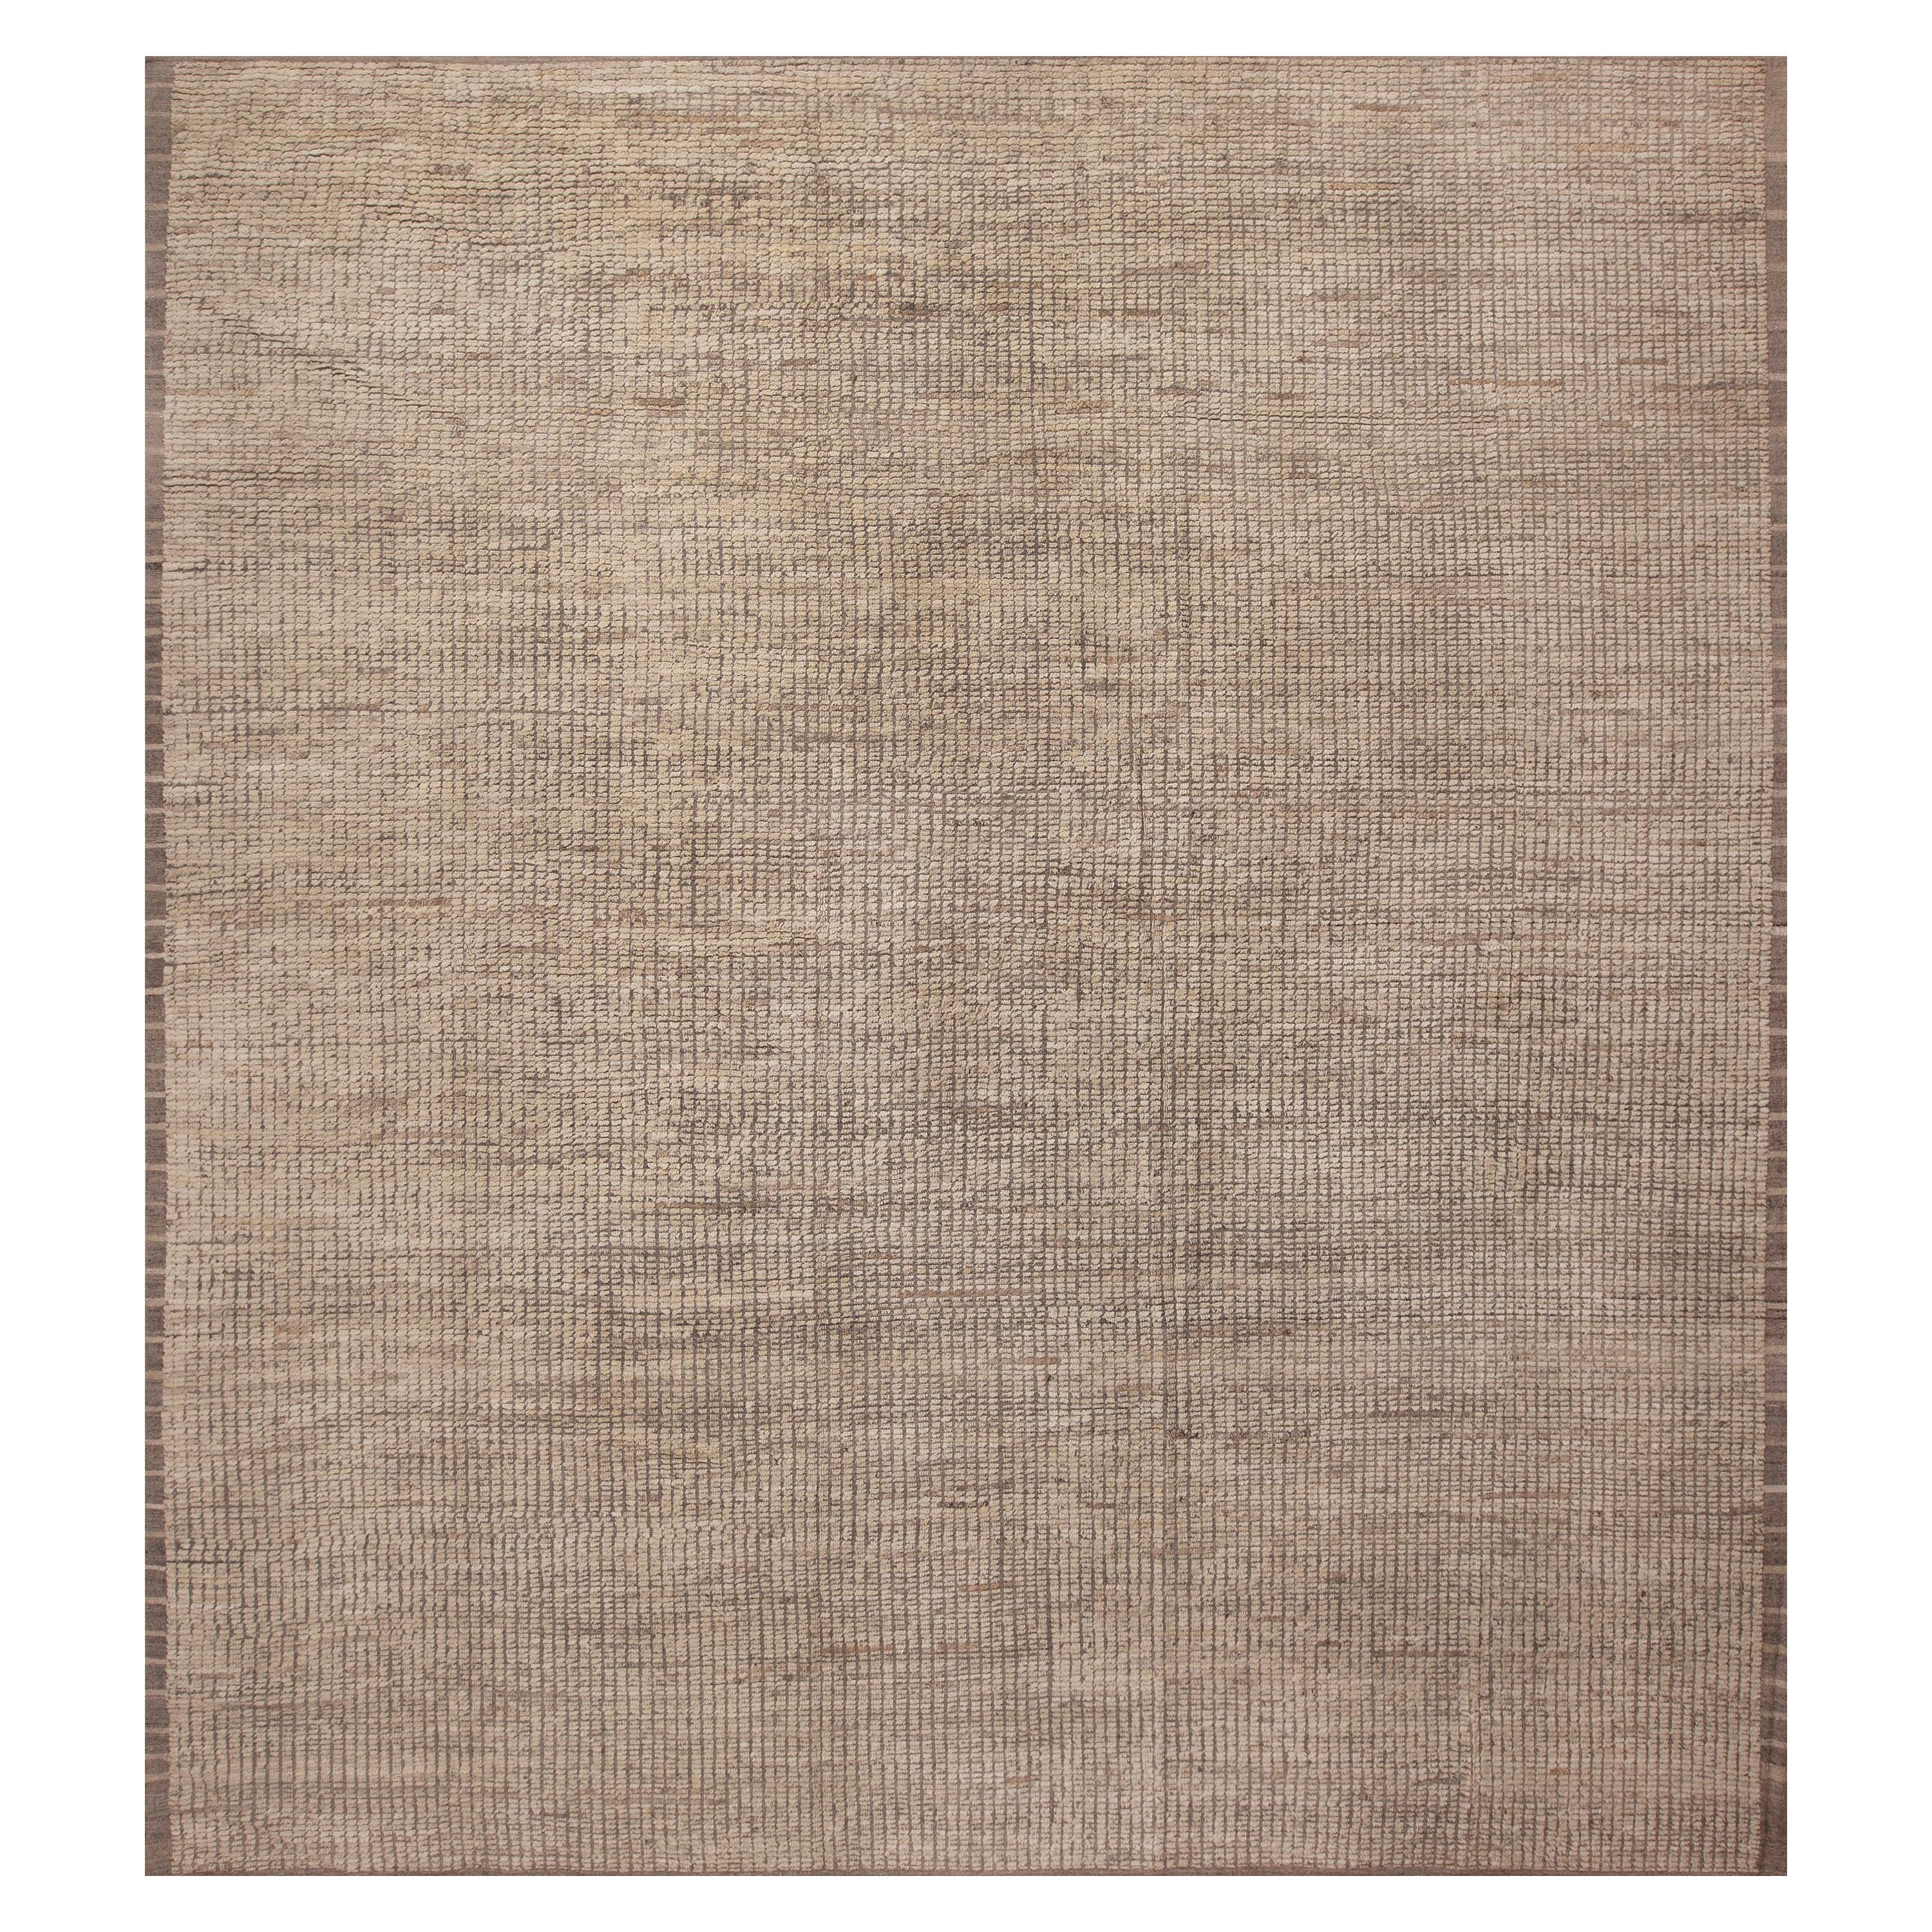 Nazmiyal Collection Square Size Neutral Color Modern Rug 13'1" x 14'4" For Sale